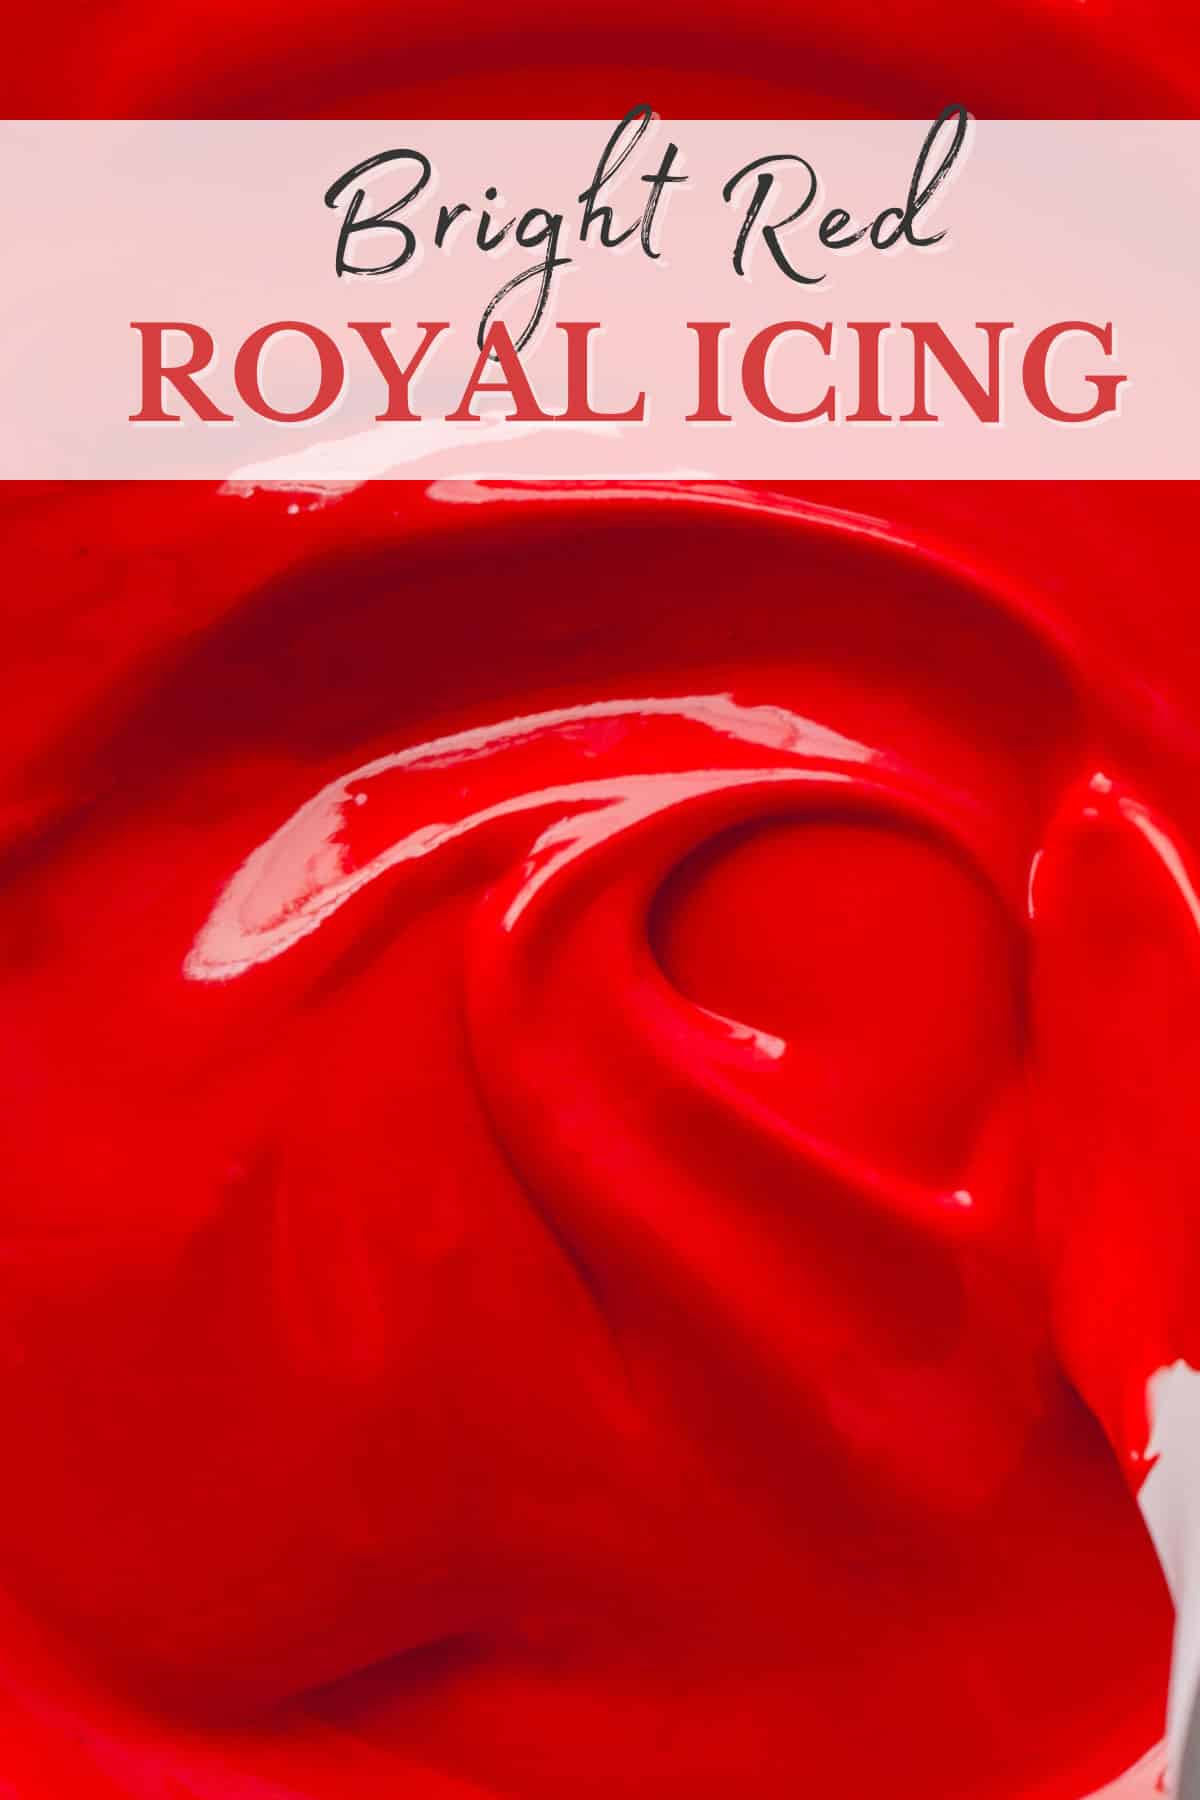 Bright red royal icing with a banner that reads, "bright red royal icing".